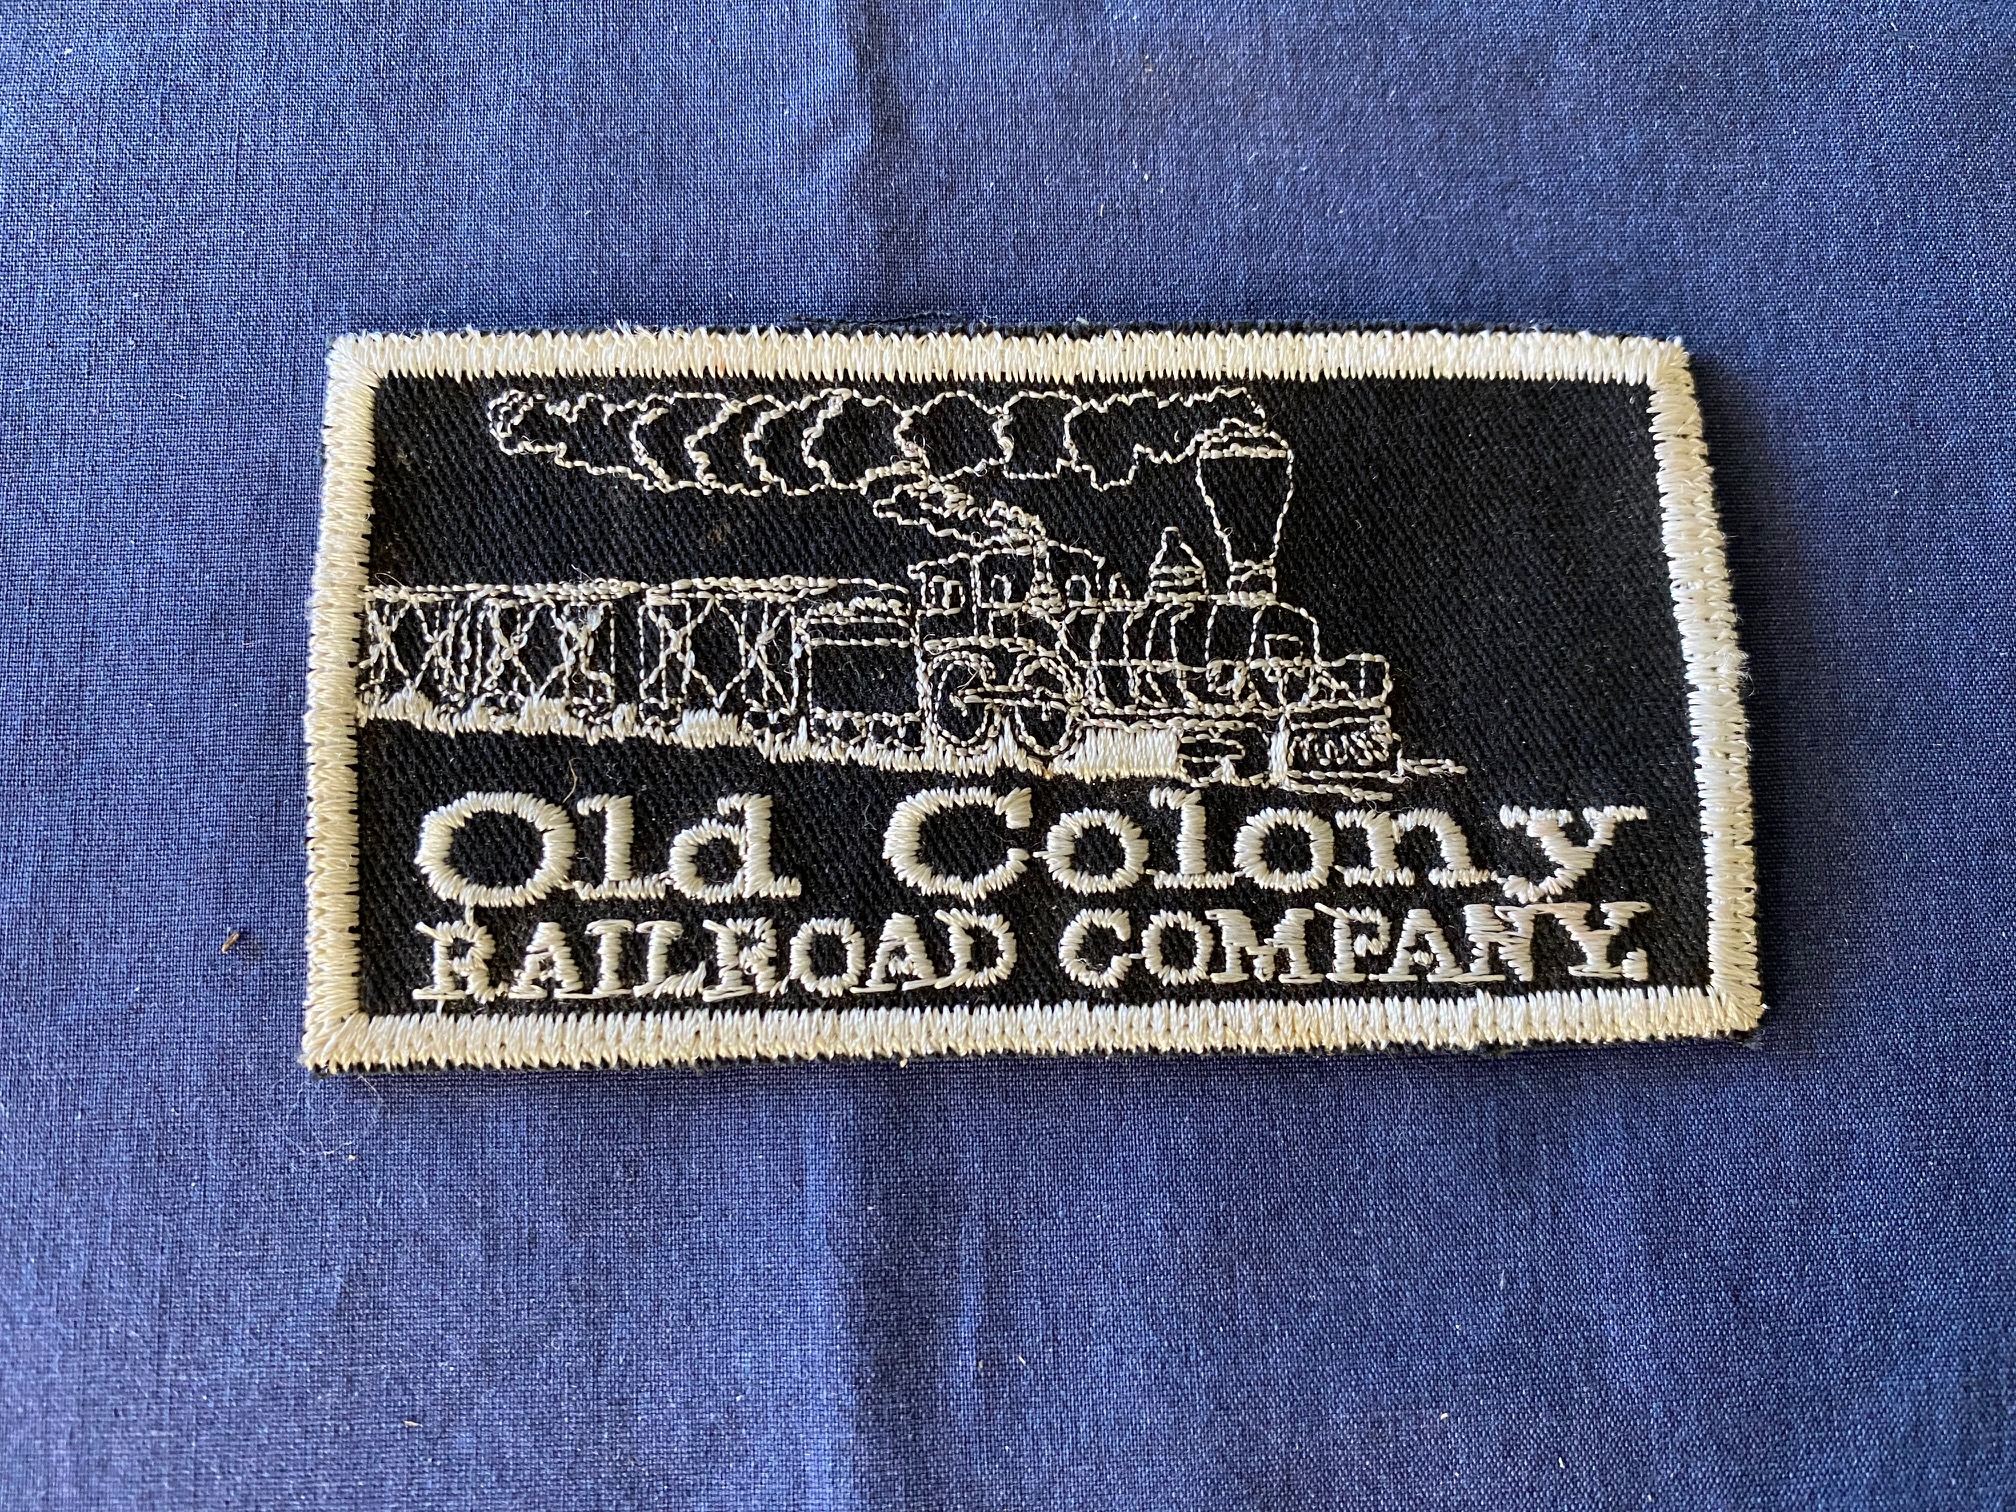 Vintage Old Colony Railroad Company Patch, Locomotive, New Old Stock